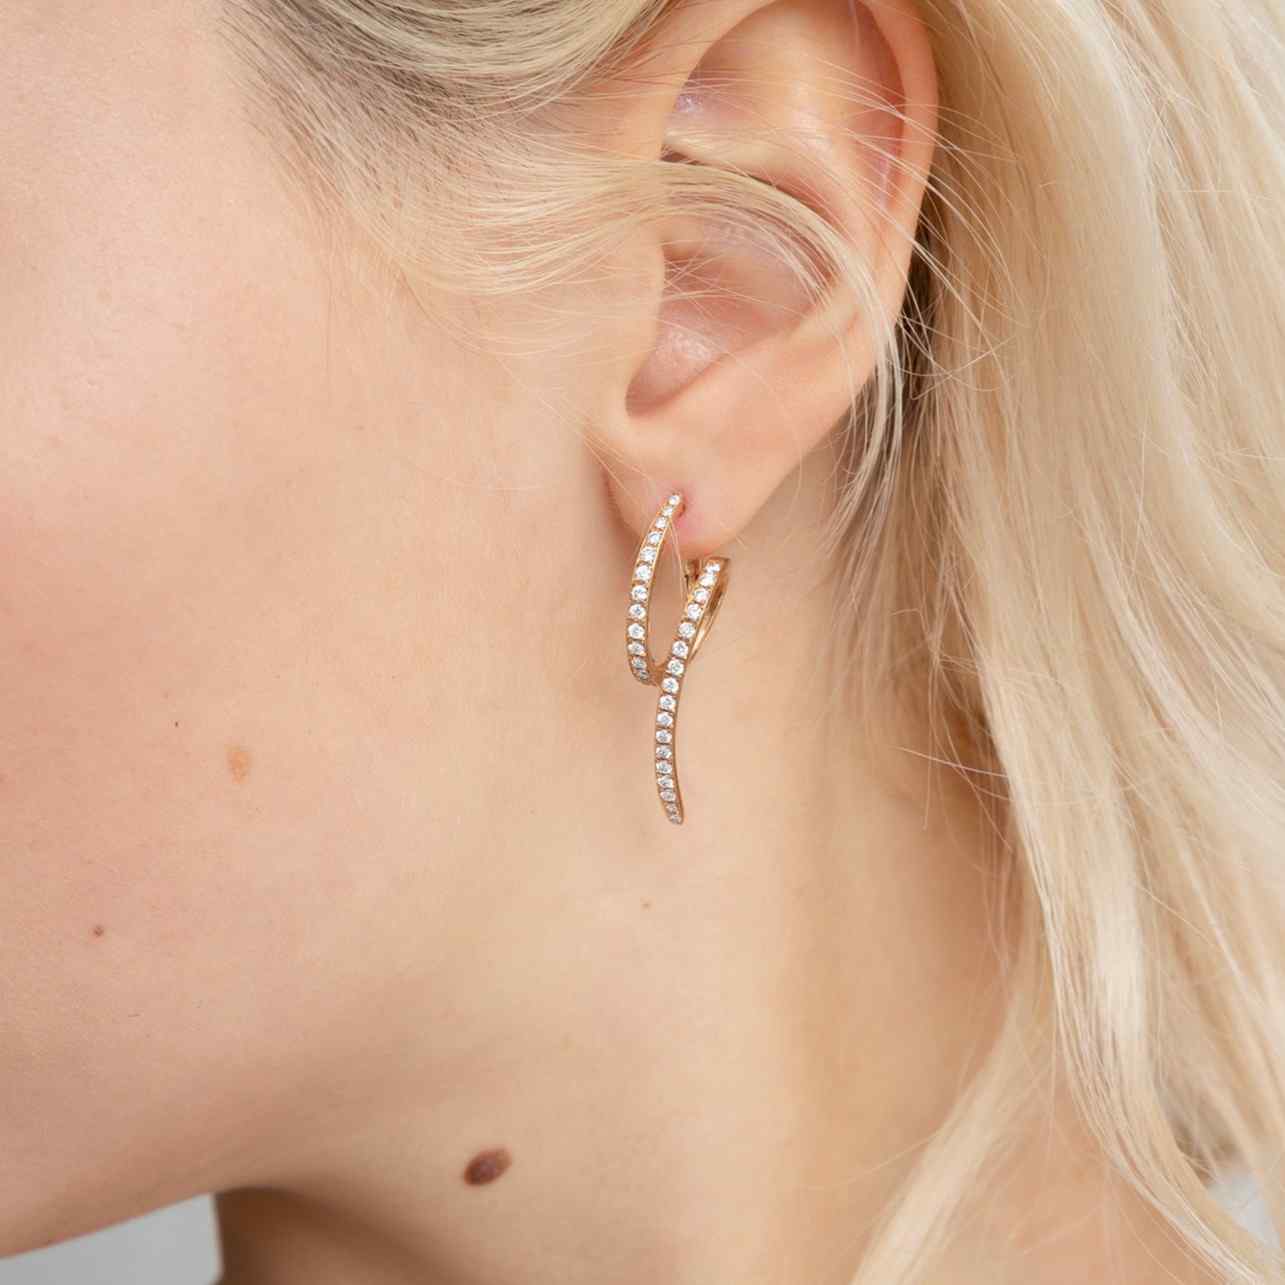 A model wears the Dalliance Lucia Earrings - a unique piece featuring 62 diamonds in a twist design with 6.25 grams of 18k recycled gold. Sold as a pair. Shown here in 18K Rose Gold.